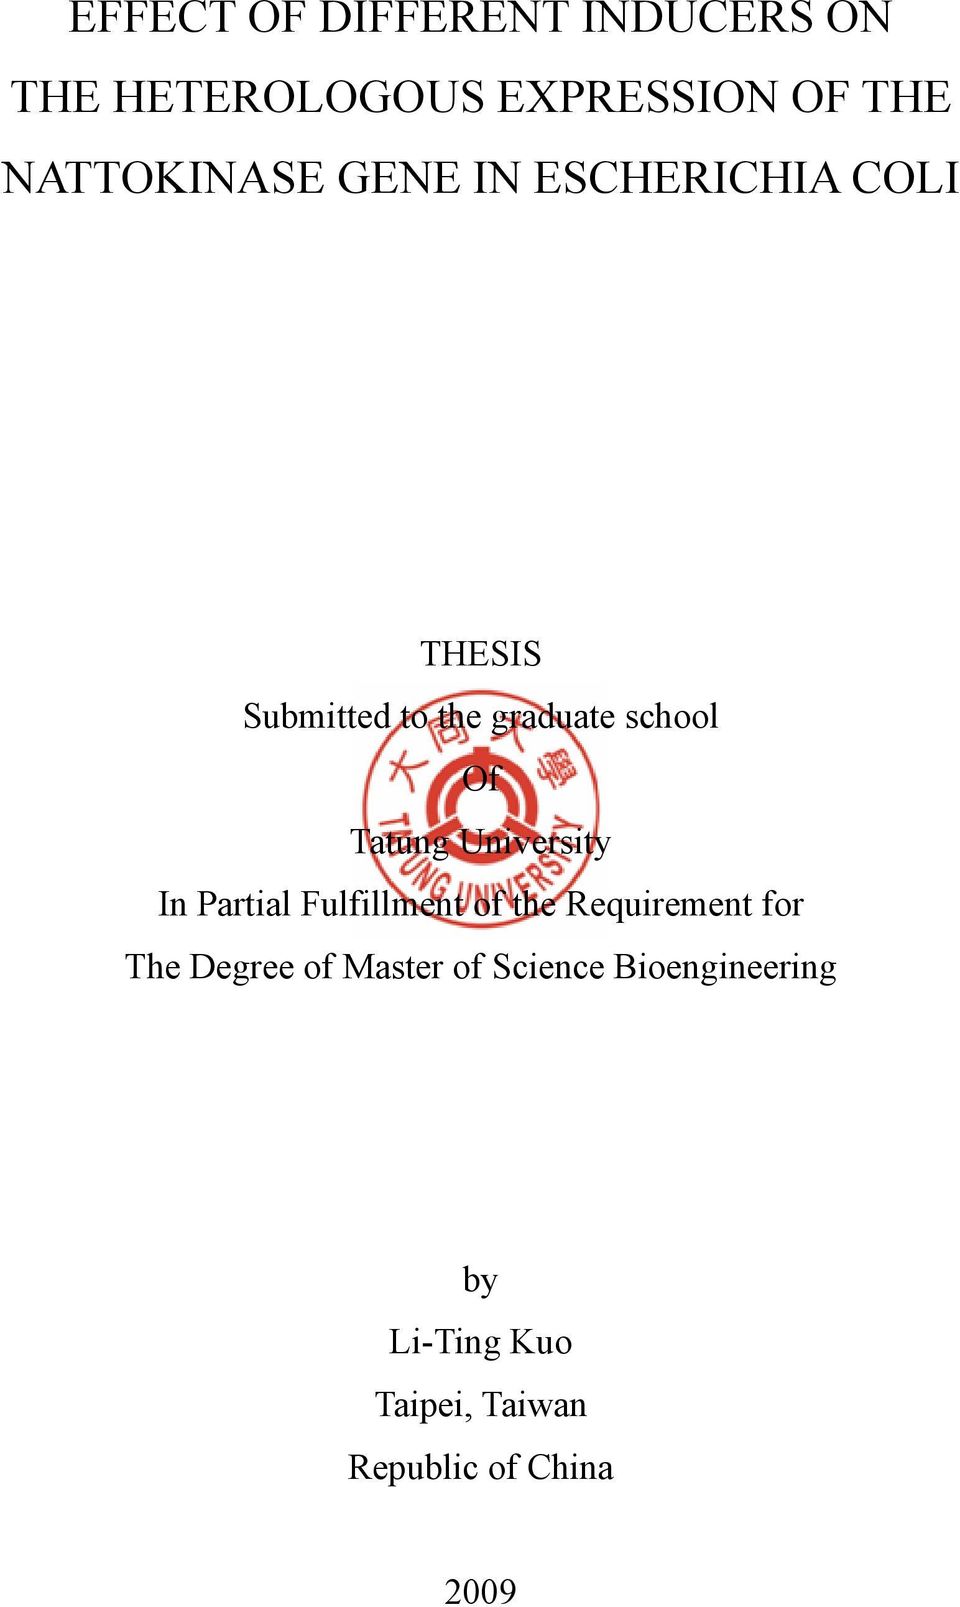 Of Tatung University In Partial Fulfillment of the Requirement for The Degree